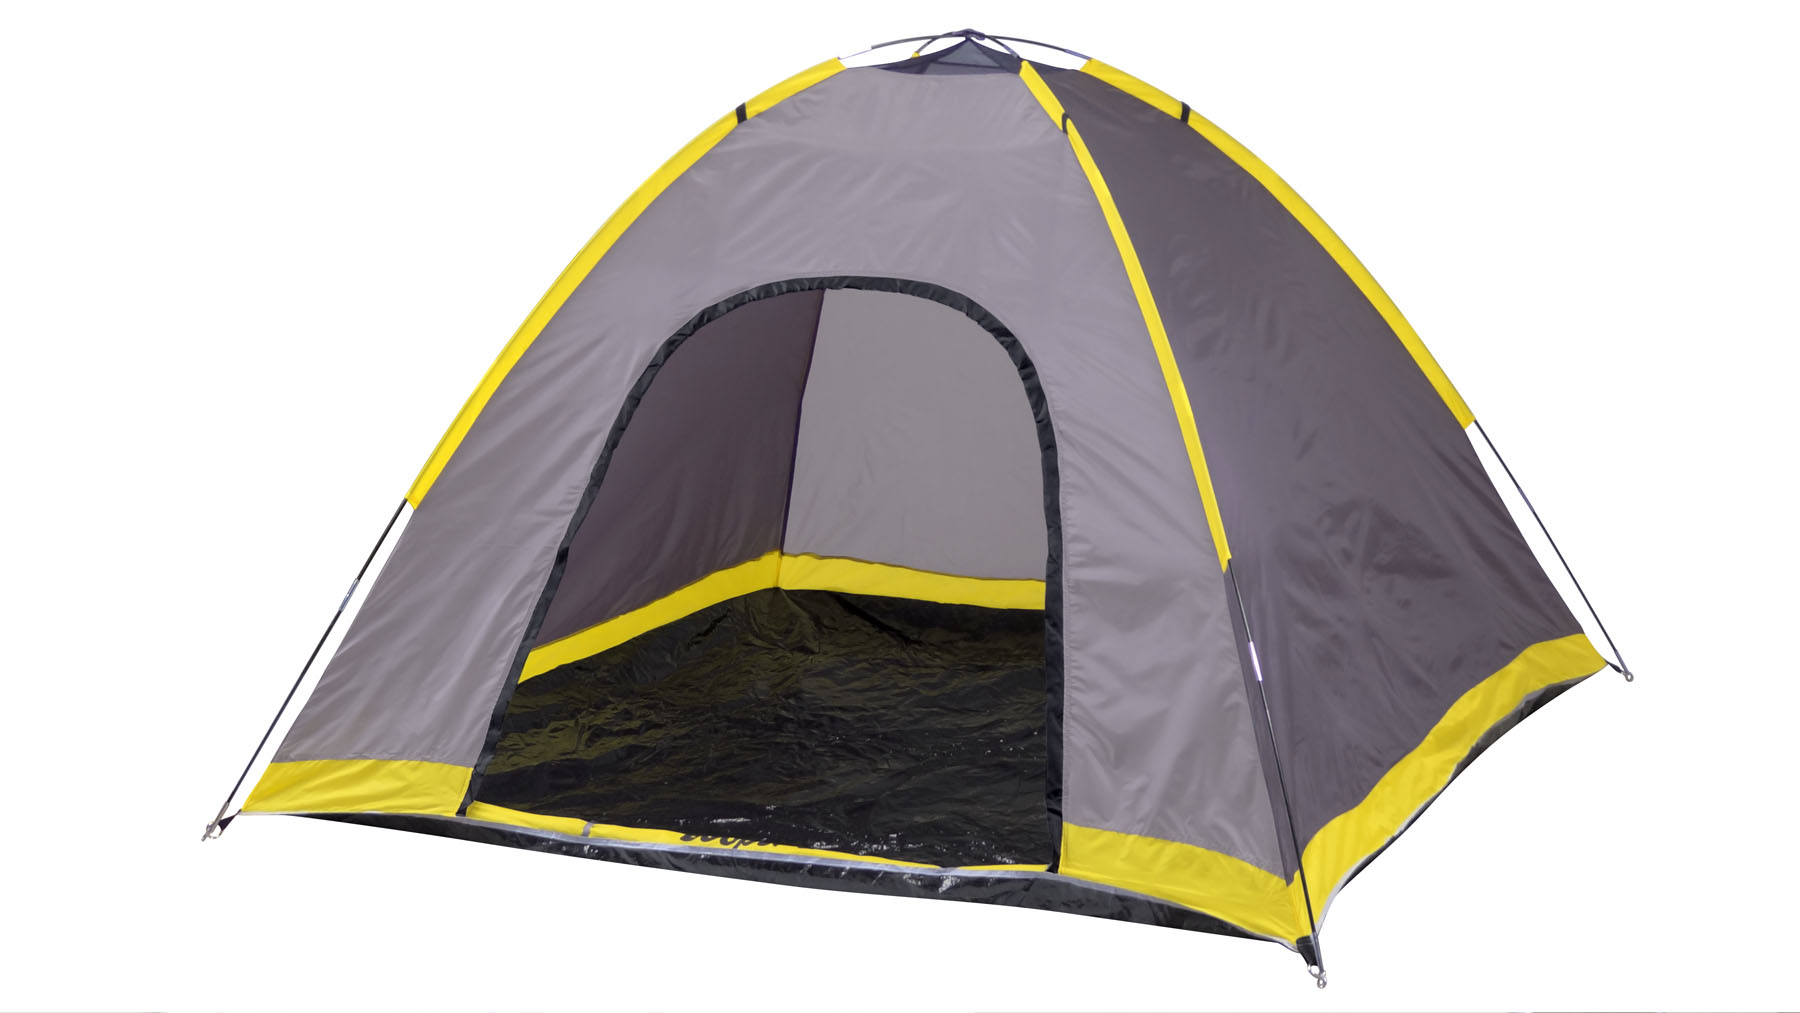 GigaTent 4-Person Dome Tent - image 1 of 5